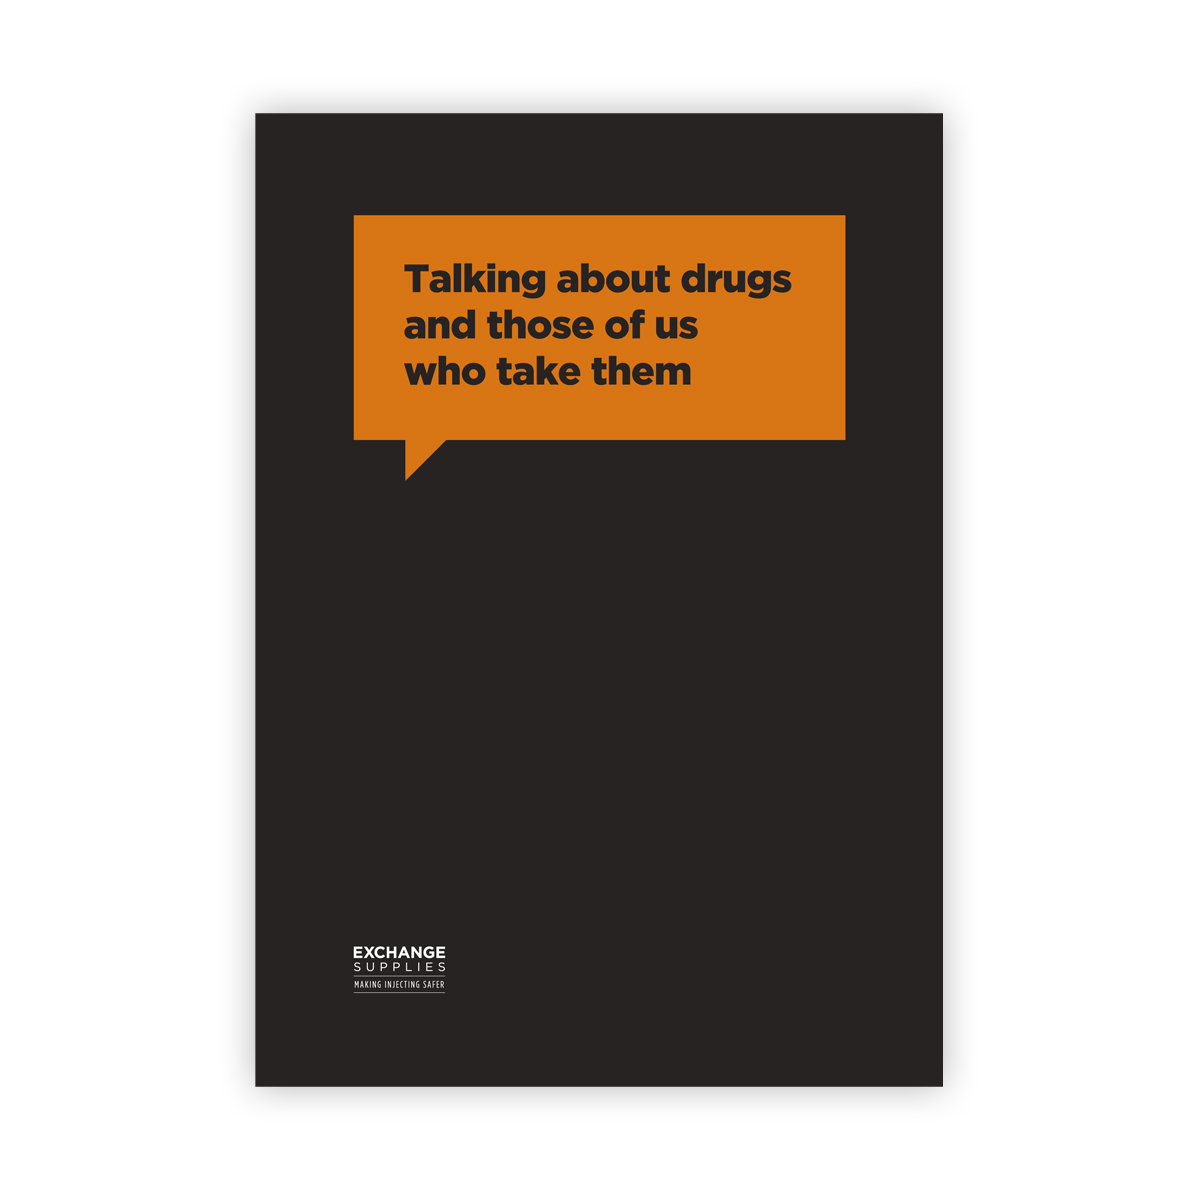 Talking about drugs and those of us who take them